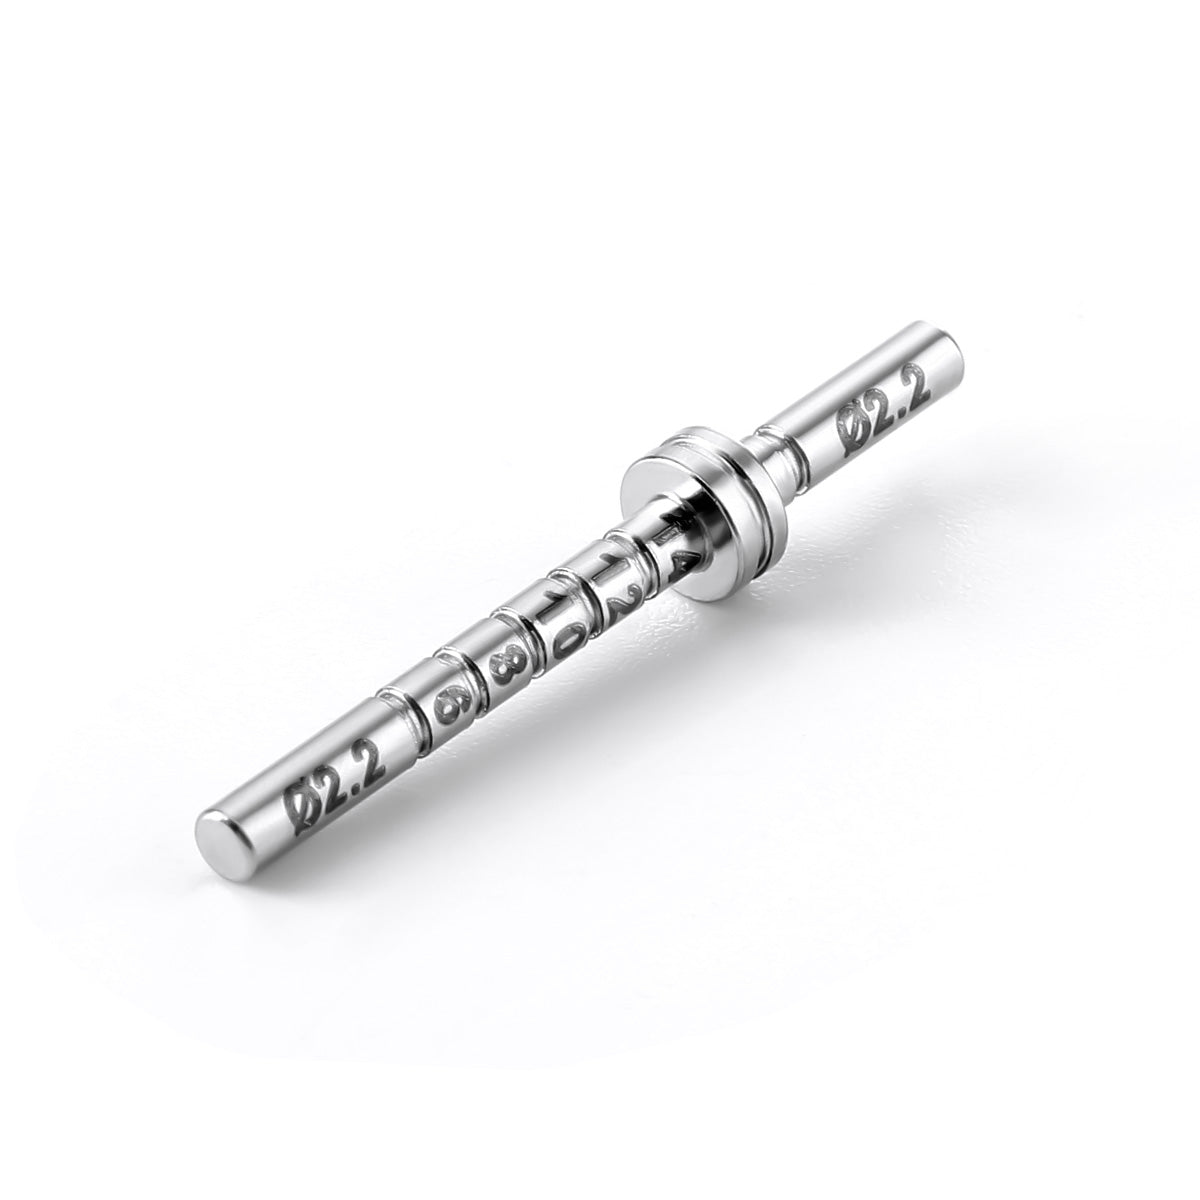 Dental Implant Depth Gauge Pin Stainless Steel Double Head 2.2/2.2mm 1pc/Pack - azdentall.com